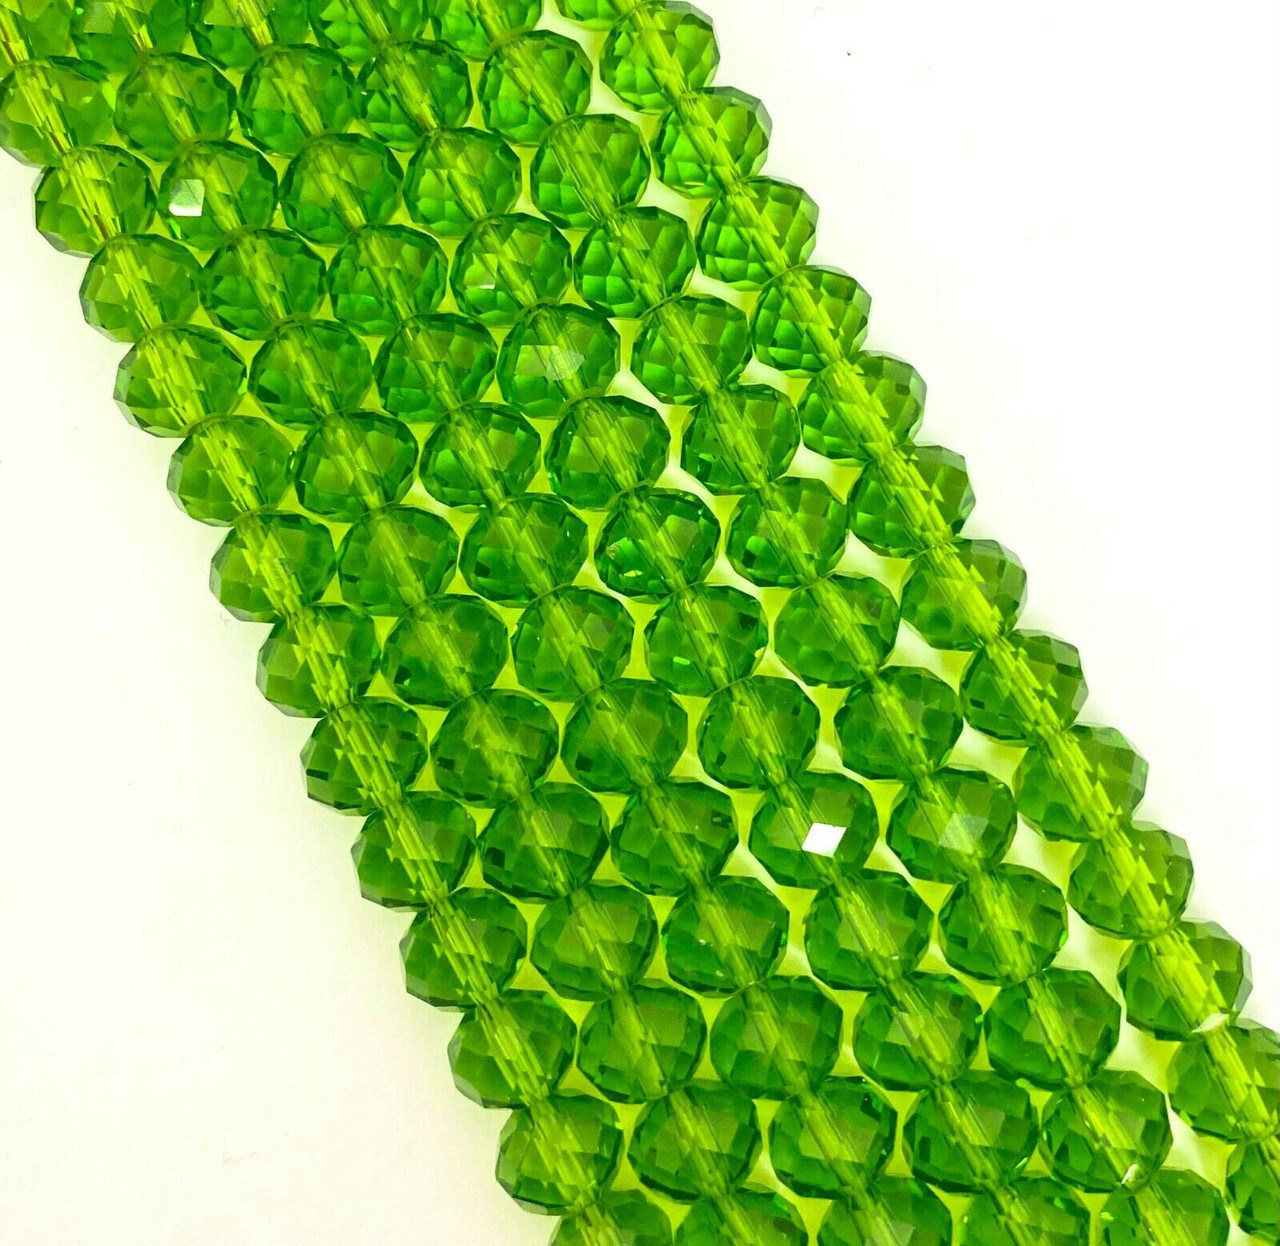 3x2mm Glass Rondelle beads - LIME GREEN - approx 15" strand (approx 200 beads)